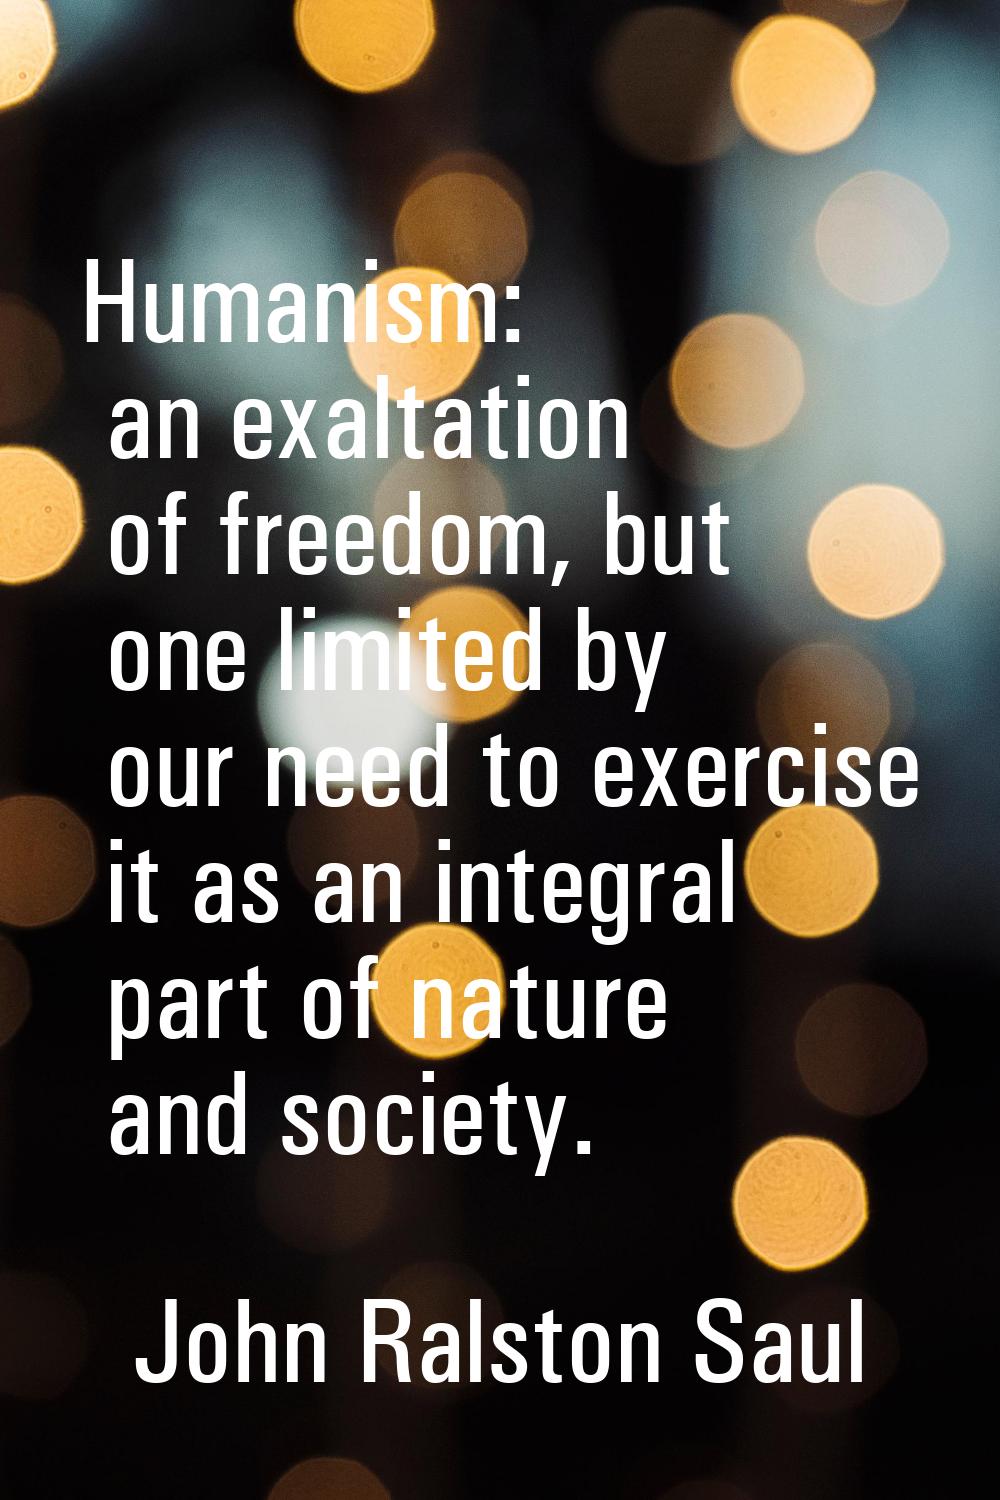 Humanism: an exaltation of freedom, but one limited by our need to exercise it as an integral part 